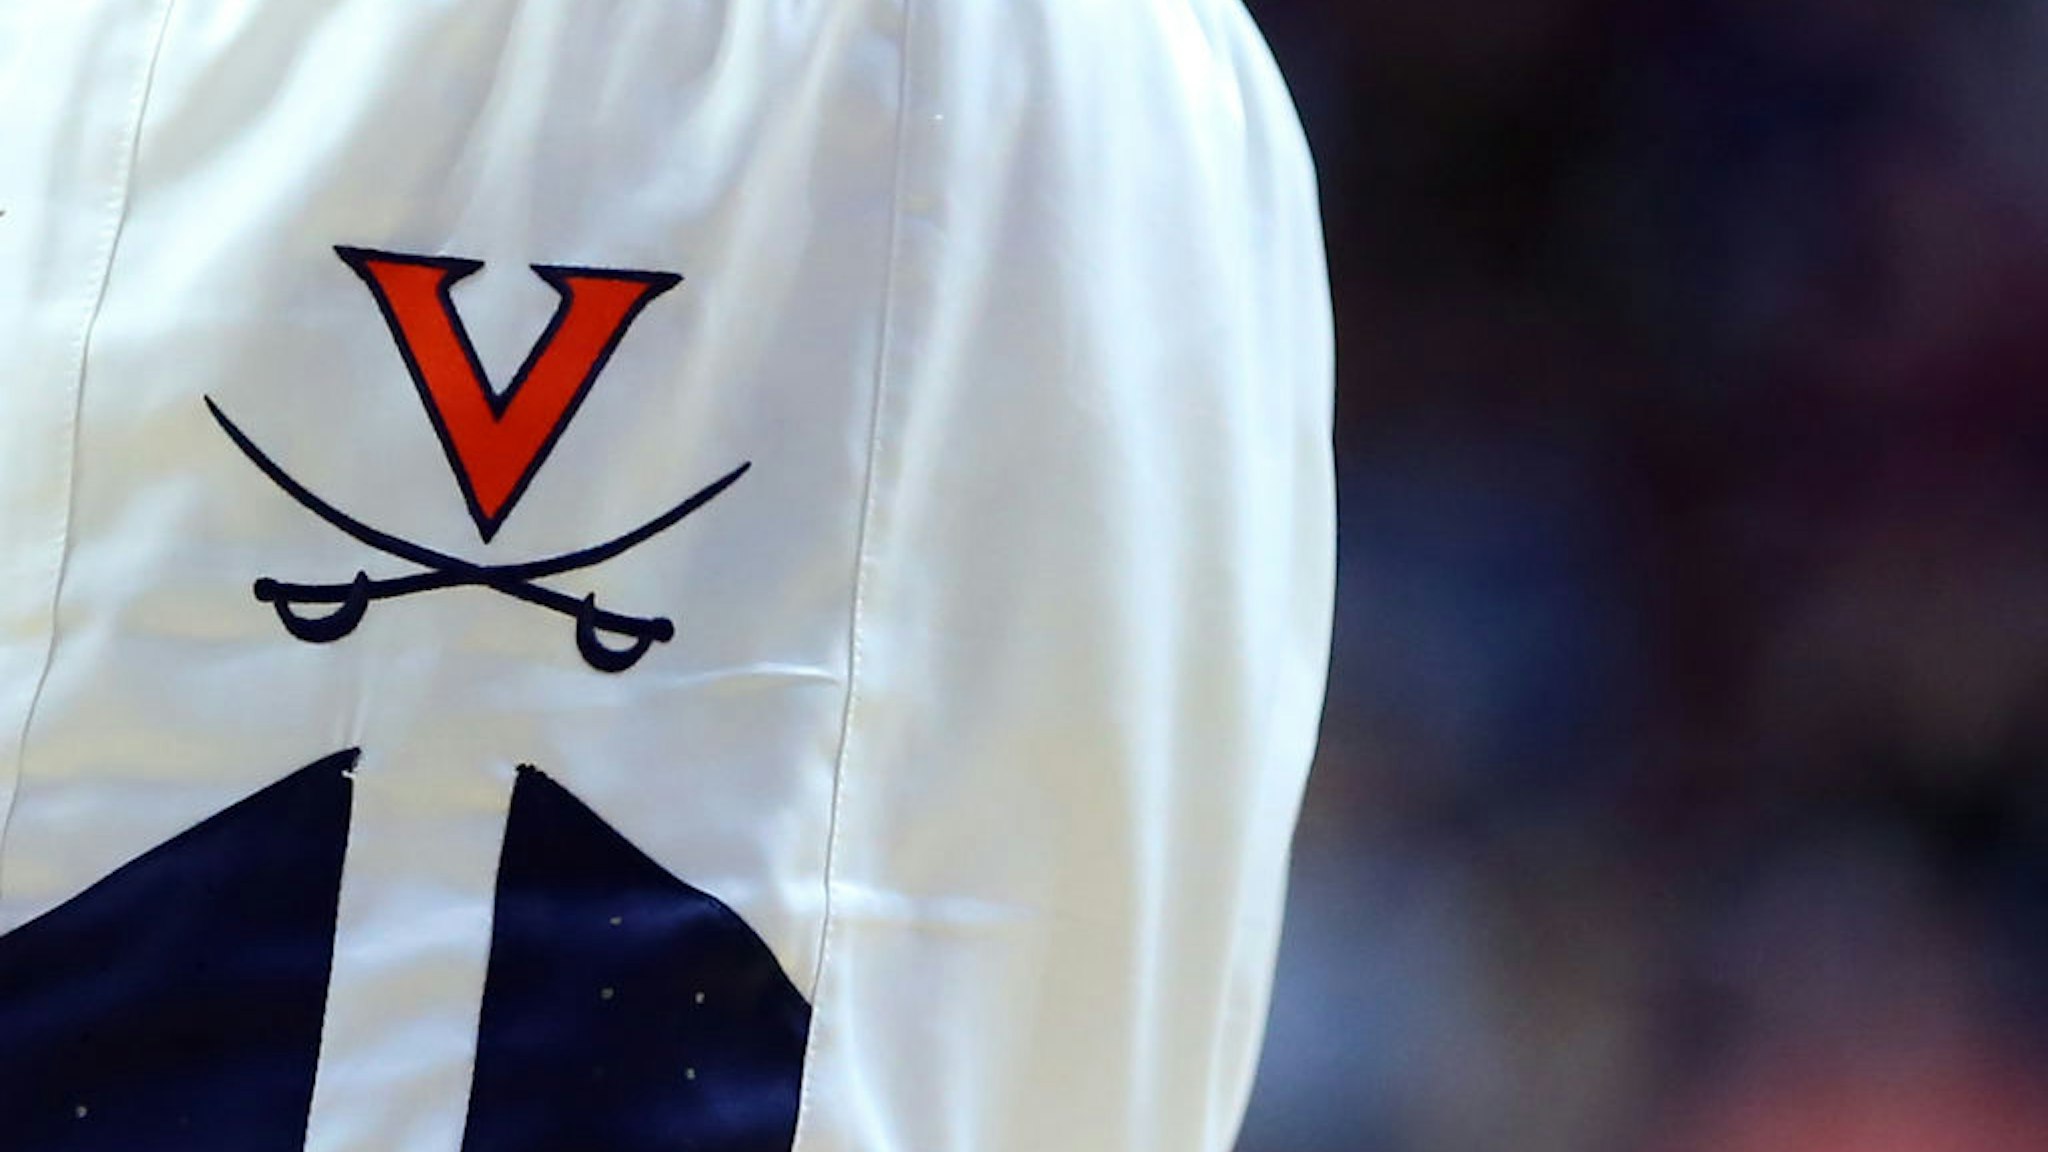 General view of the Virginia Cavaliers logo on a pair of game shorts during the college basketball against UMass Minutemen on November 23, 2019, at Mohegan Sun Arena in Uncasville, CT.